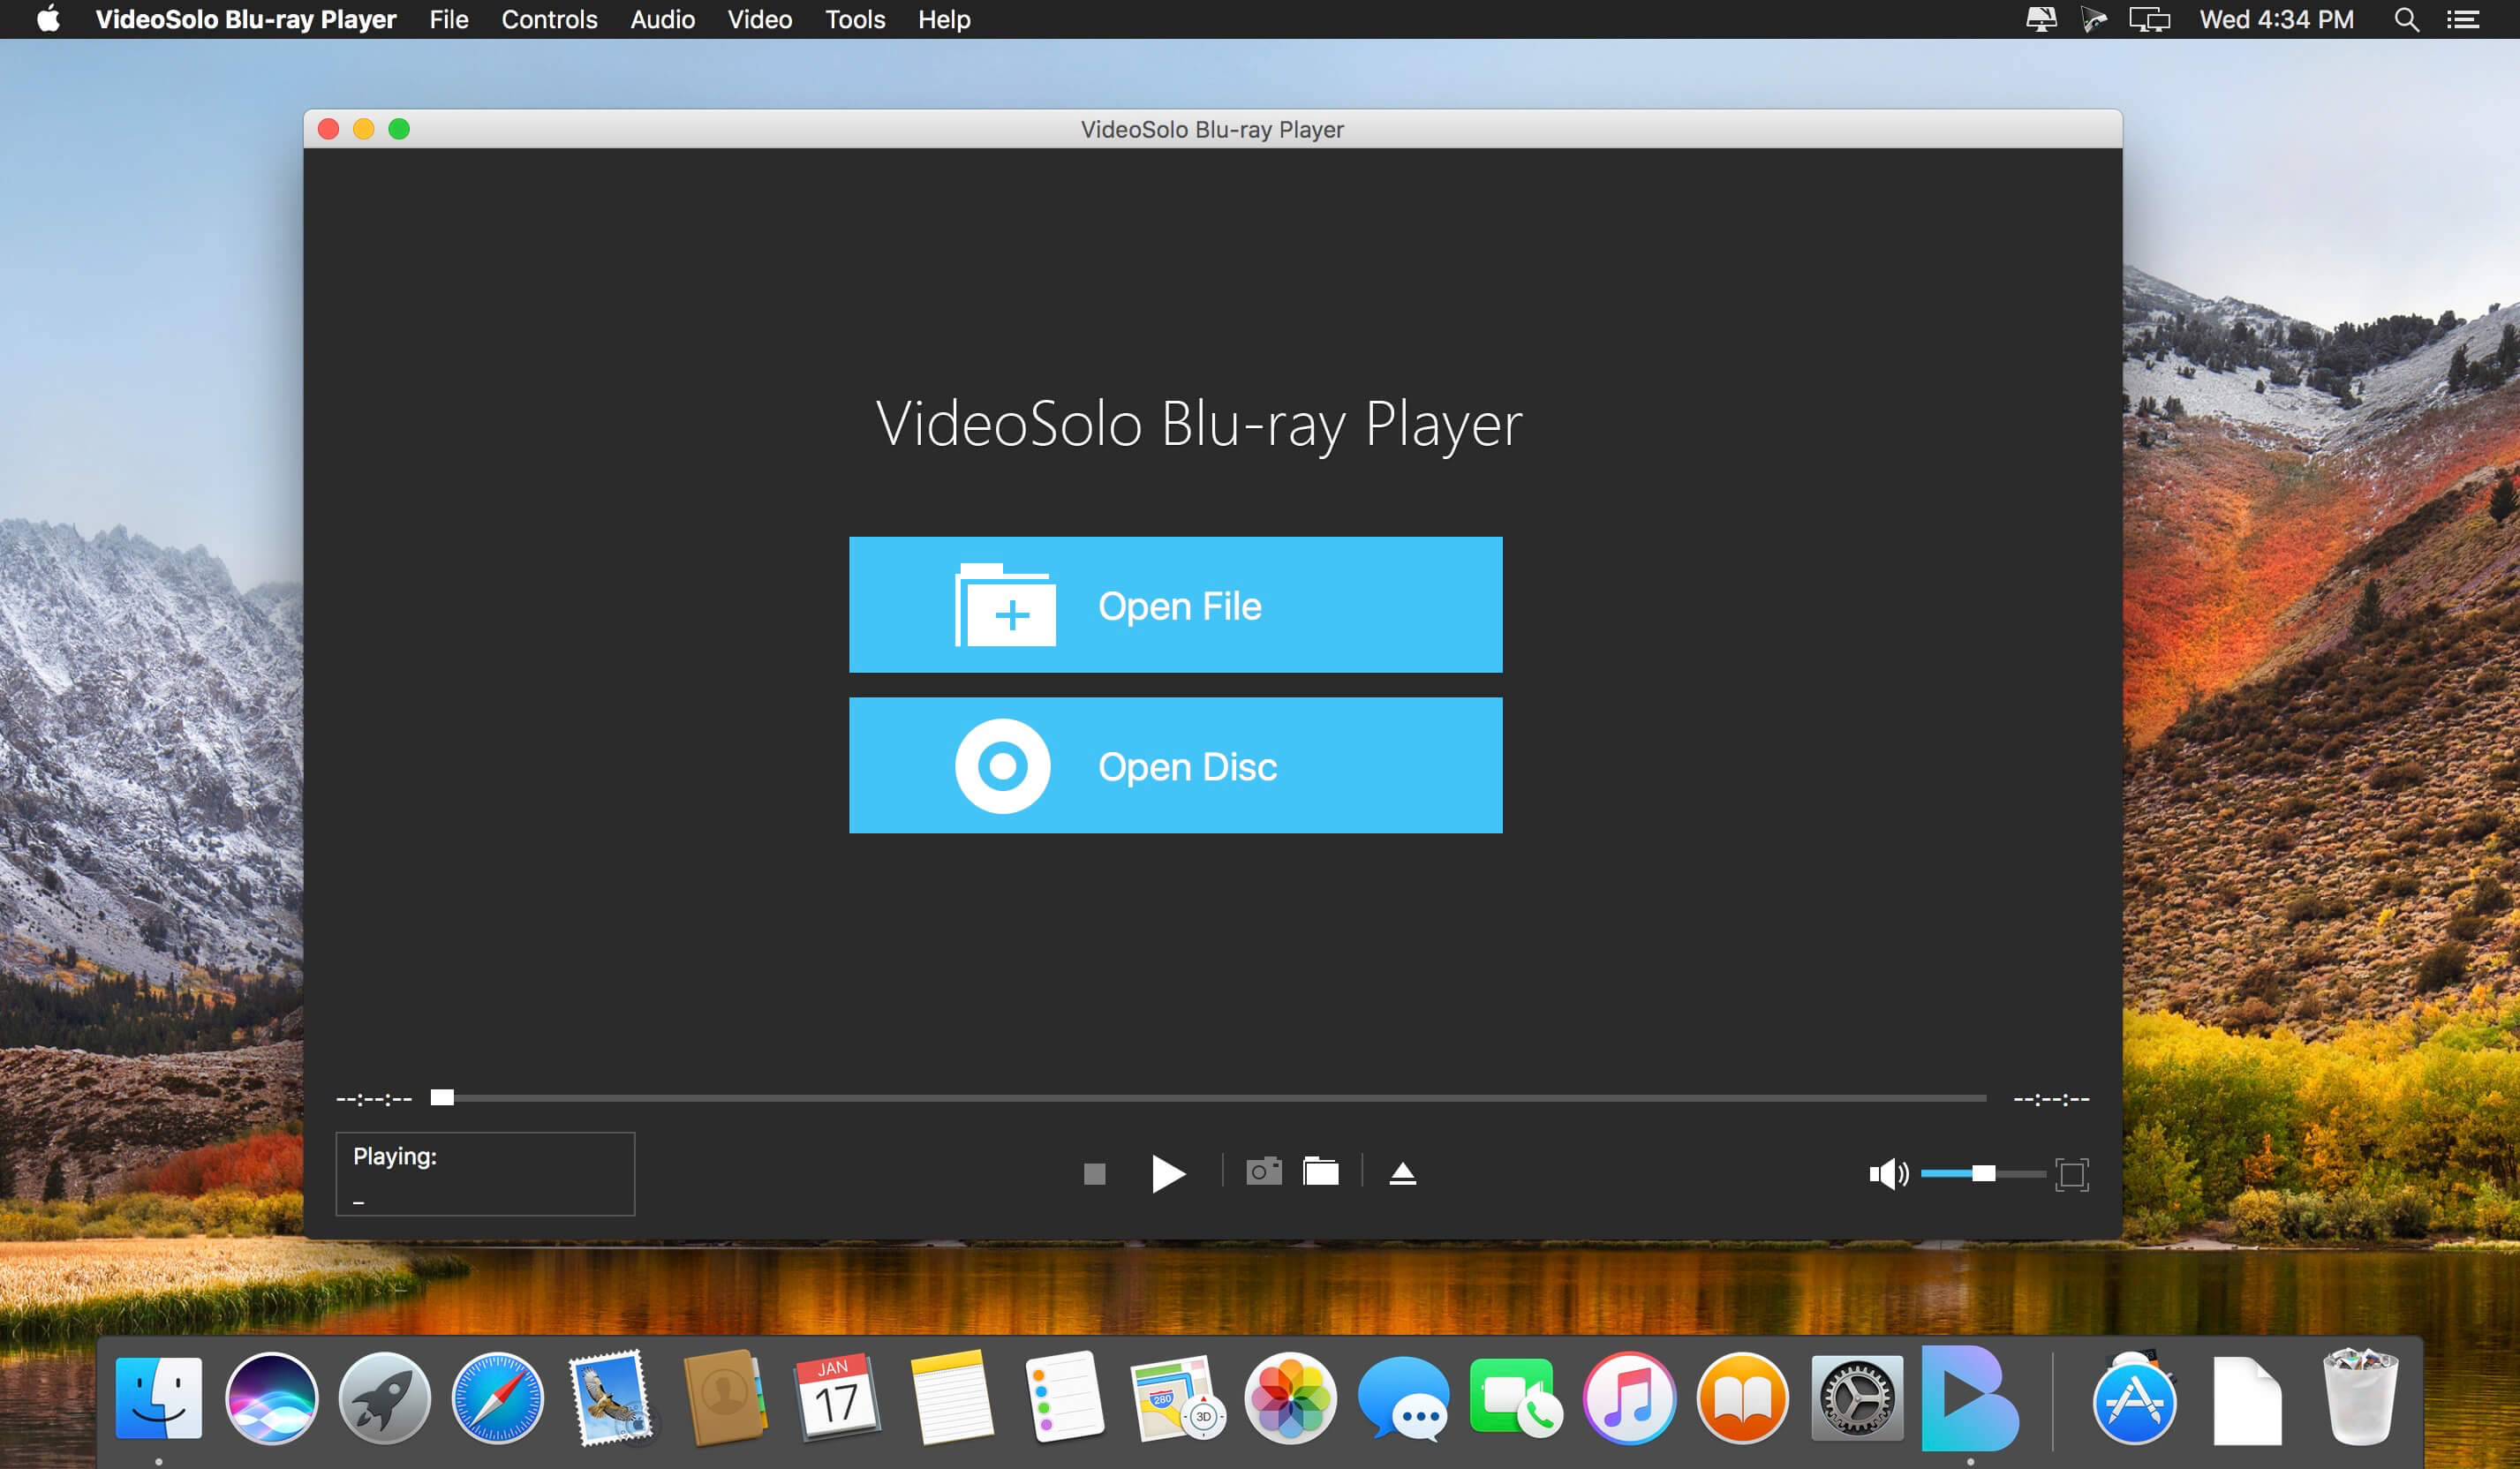 download the last version for ipod Aiseesoft Blu-ray Player 6.7.60